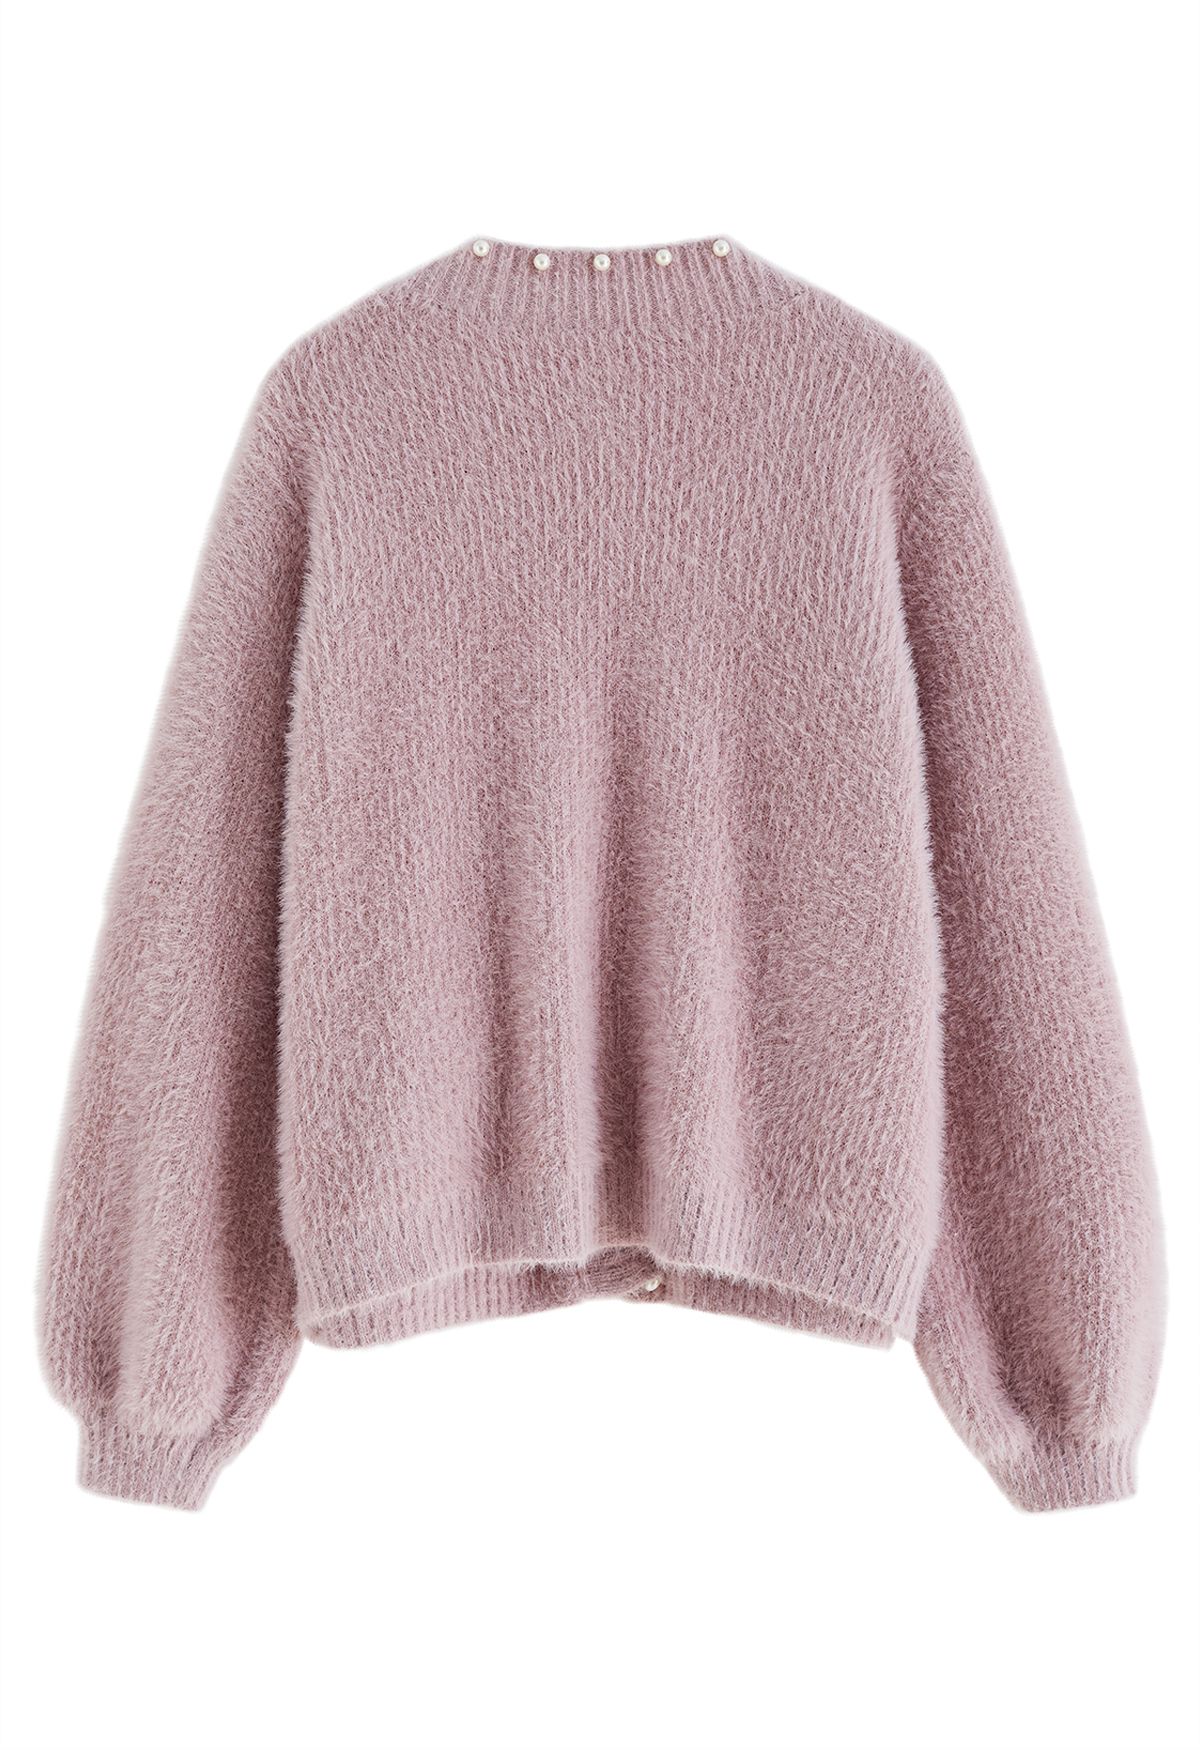 Pearls Trim Pocket Fuzzy Knit Cardigan in Dusty Pink - Retro, Indie and ...